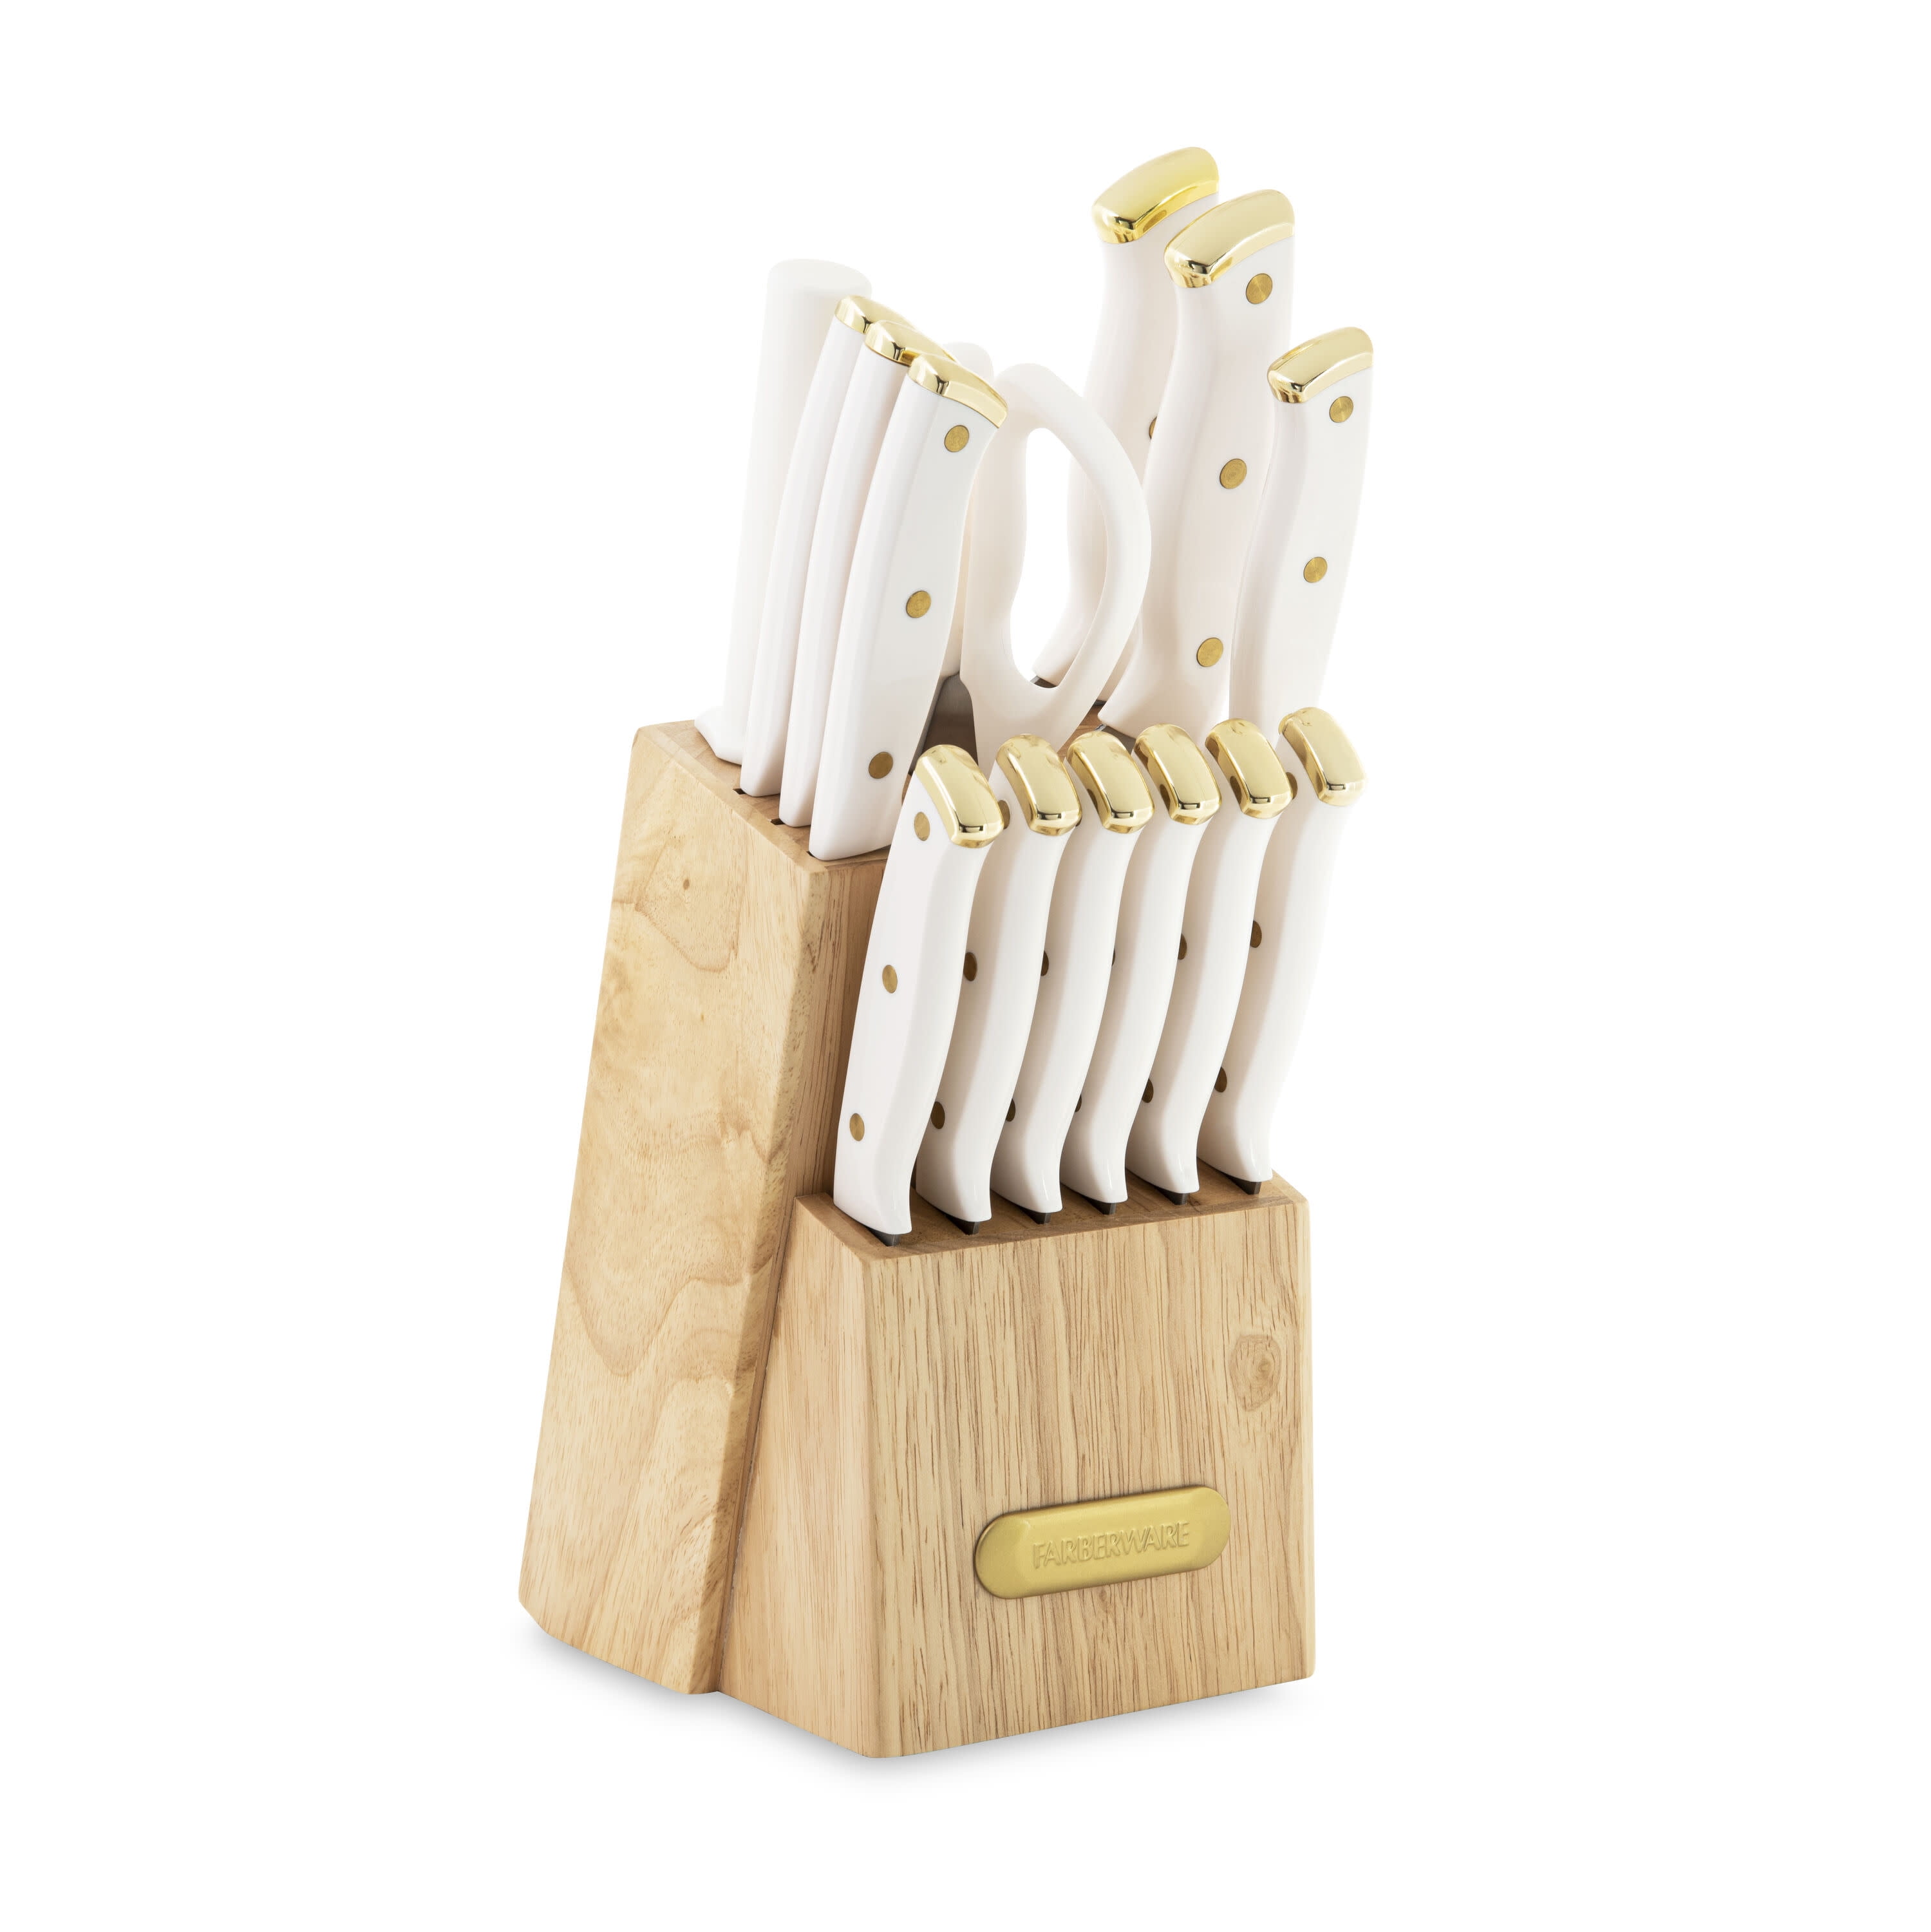 farberware-triple-riveted-knife-block-set-15-piece-in-white-and-gold